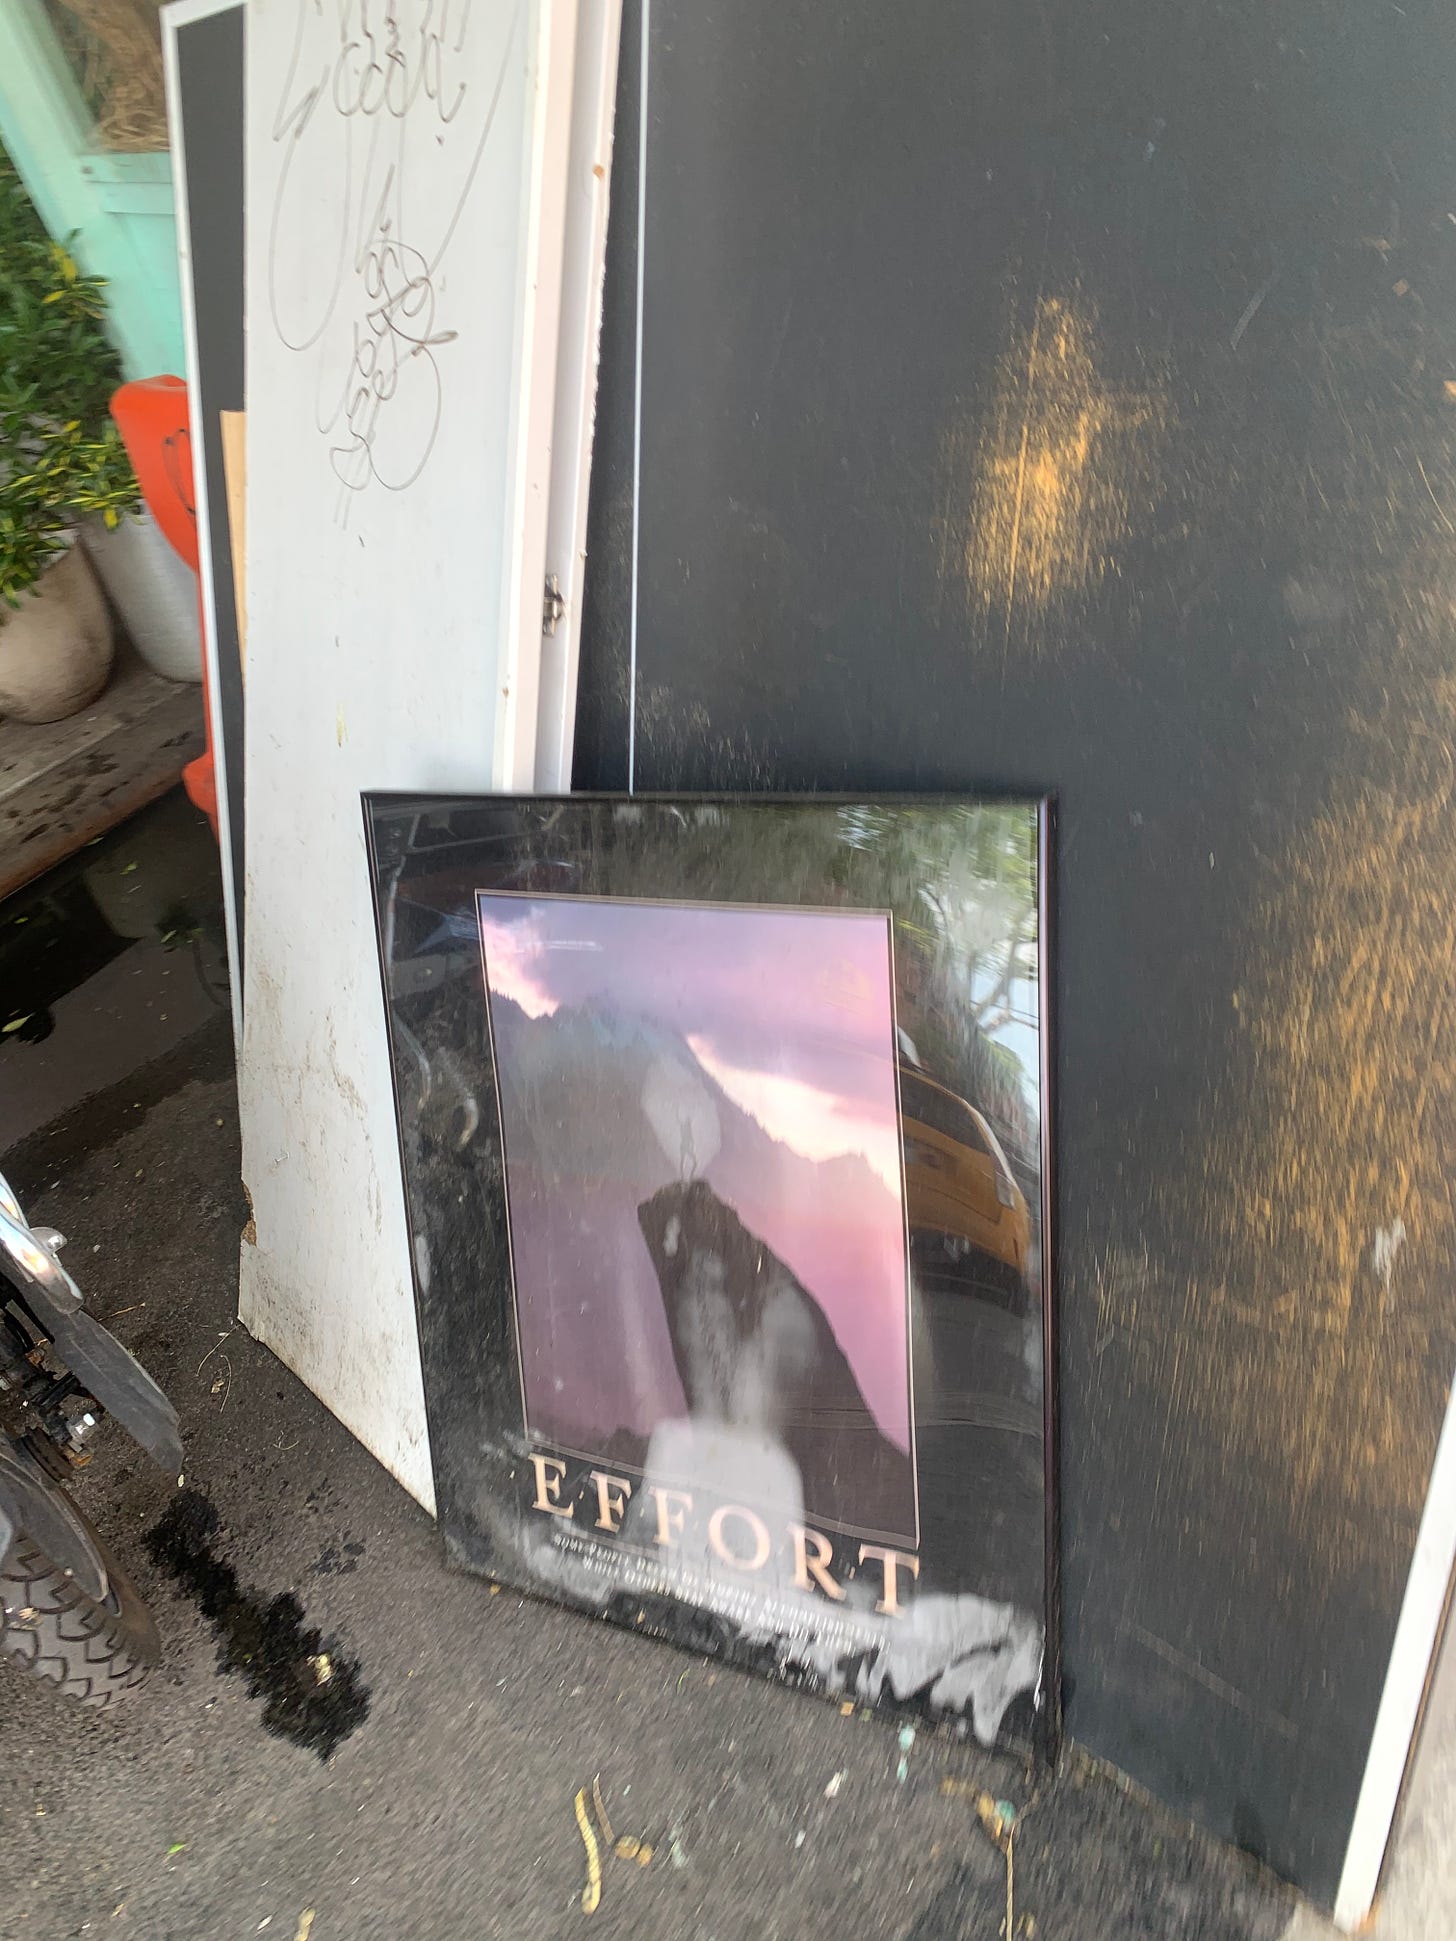 A framed poster reading "effort" stands leaning against a bus stop